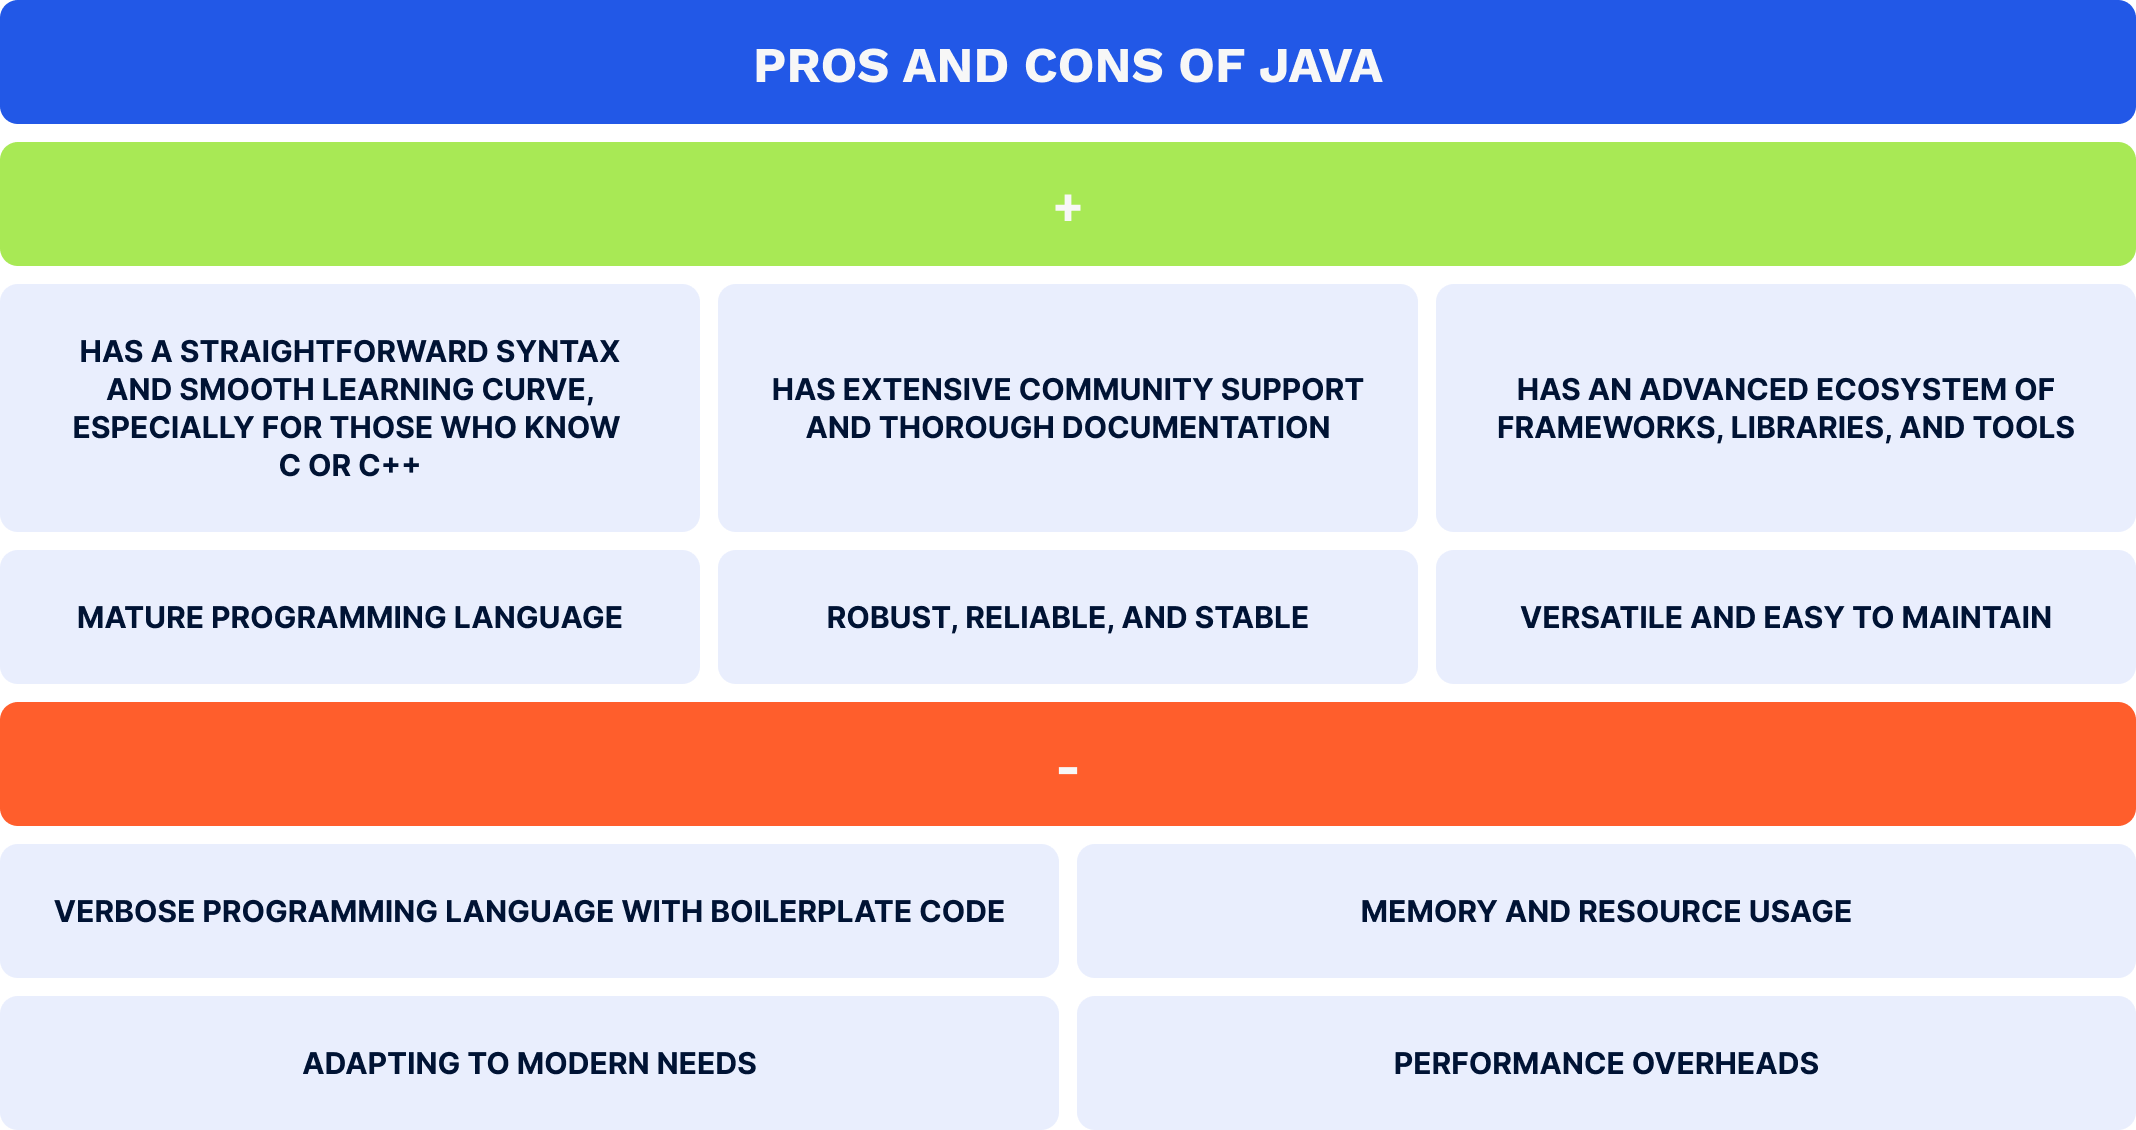 Pros and cons of Java